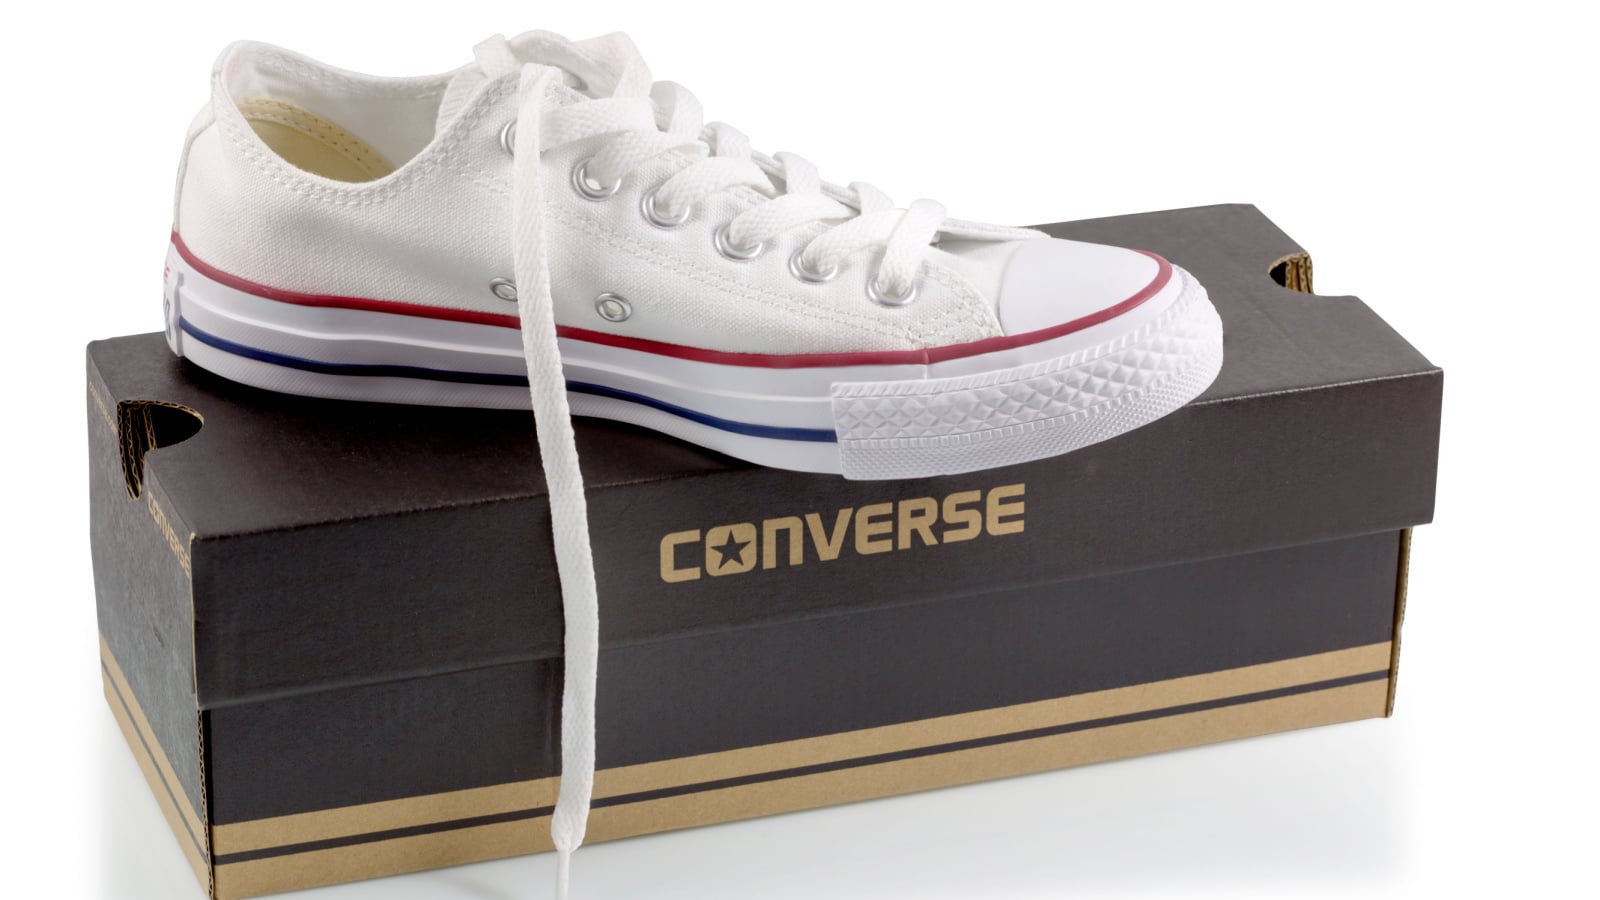 Italy, Genova (genoa) - June 12, 2018: close up of sport white sneaker shoes, white shoes Converse All Star low tops against on black box isolated on white background with clipping path.Important information Editorial Use Only. Interested in using Editorial content for commercial purposes? Our commercial license with Asset AssuranceTM may be available to offer the legal coverage and peace of mind you need. Photo Formats 5329 × 3546 pixels • 45.1 × 30 cm • DPI 300 • JPG 1000 × 665 pixels • 8.5 × 5.6 cm • DPI 300 • JPG 500 × 333 pixels • 4.2 × 2.8 cm • DPI 300 • JPG 